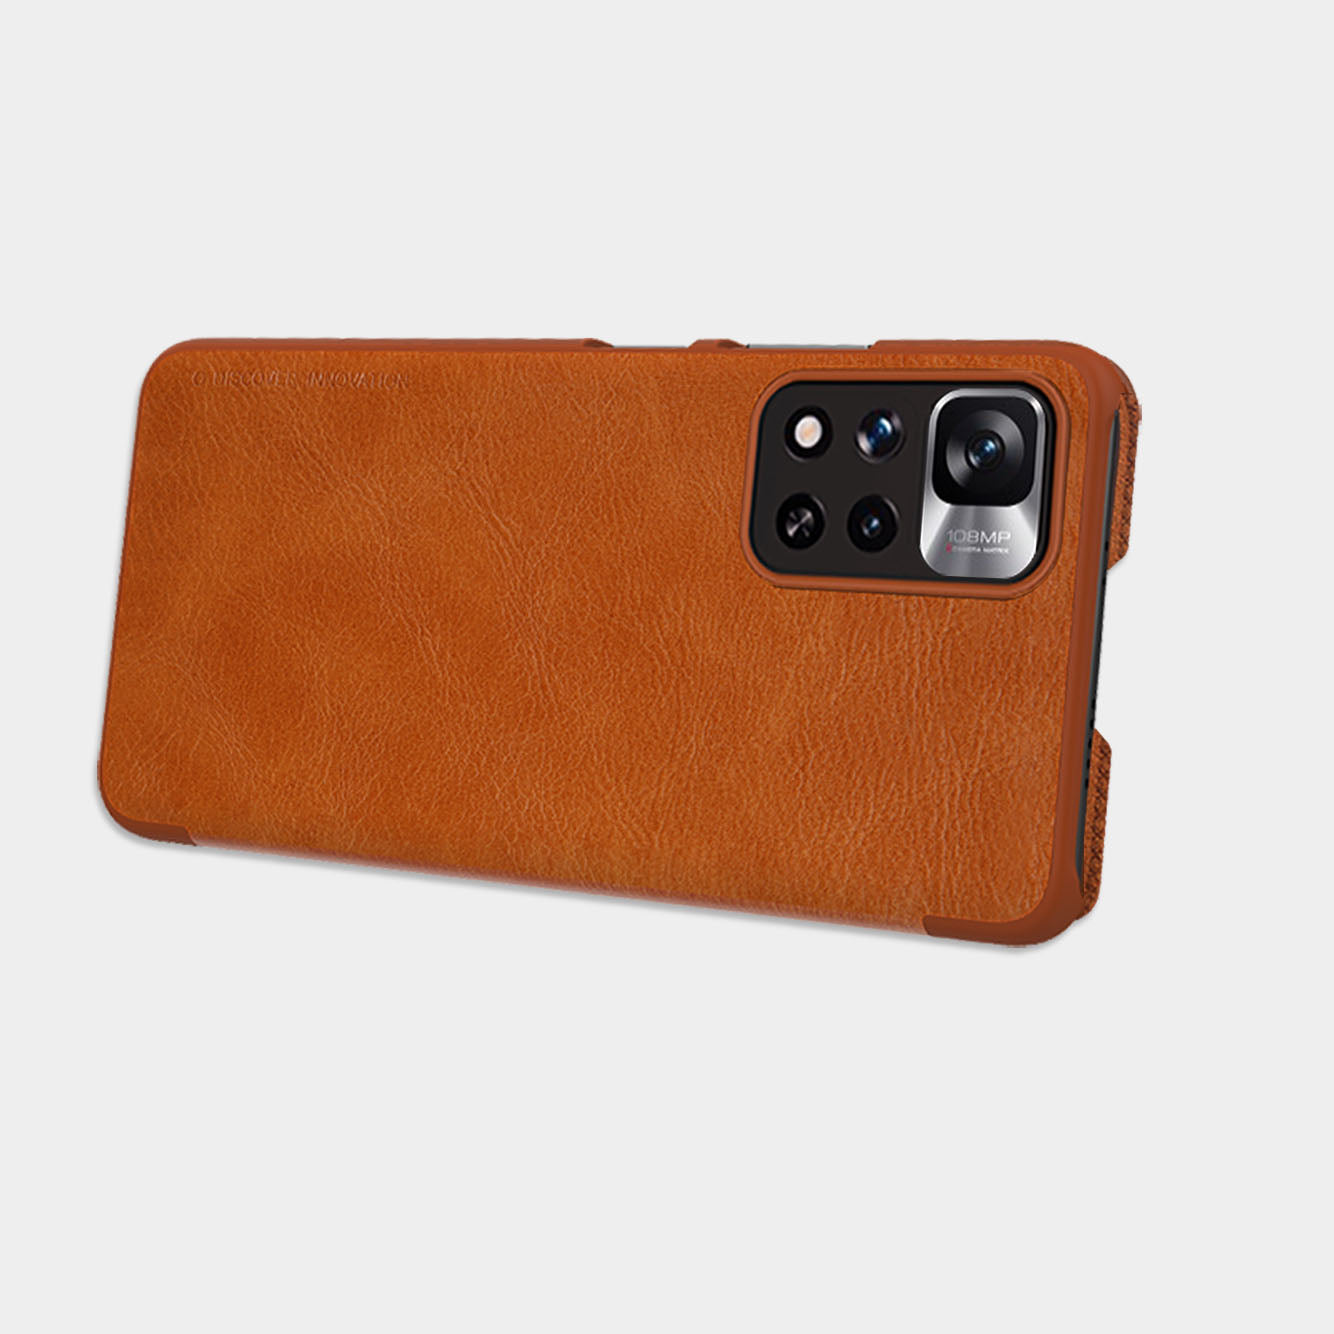 Nillkin Qin Case Cover For Xiaomi Redmi Note 11 Pro+ (China) / Redmi Note 11 Pro (China) / Mi11i HyperCharge Camera Protector Holster Cover Flip Case Brown